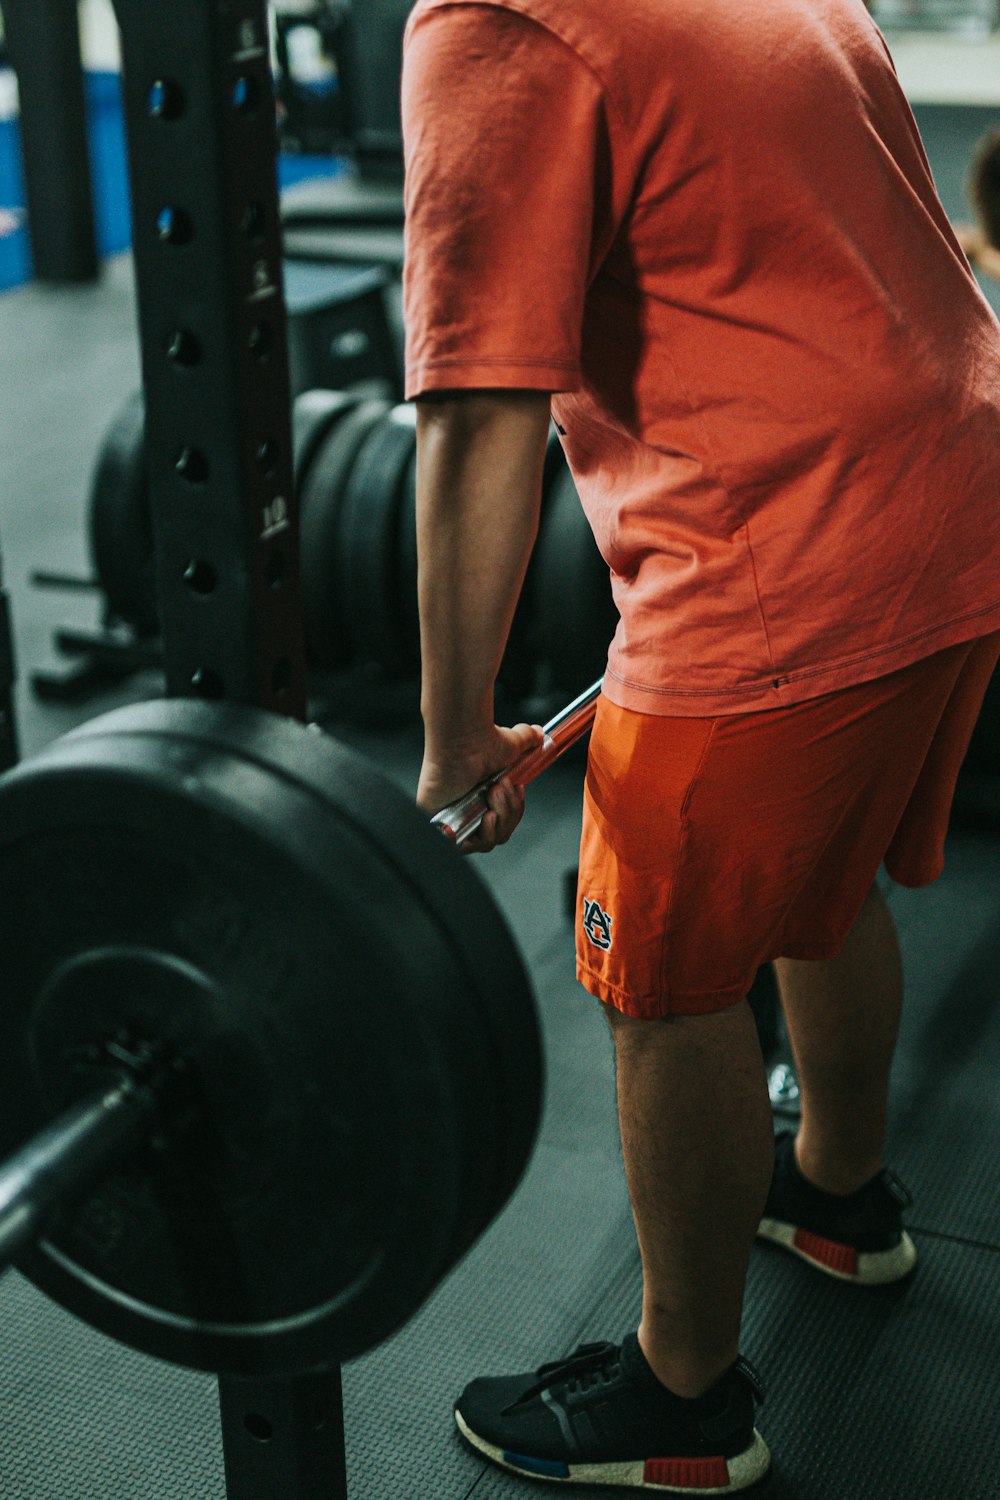 man in orange t-shirt and red shorts carrying black barbell